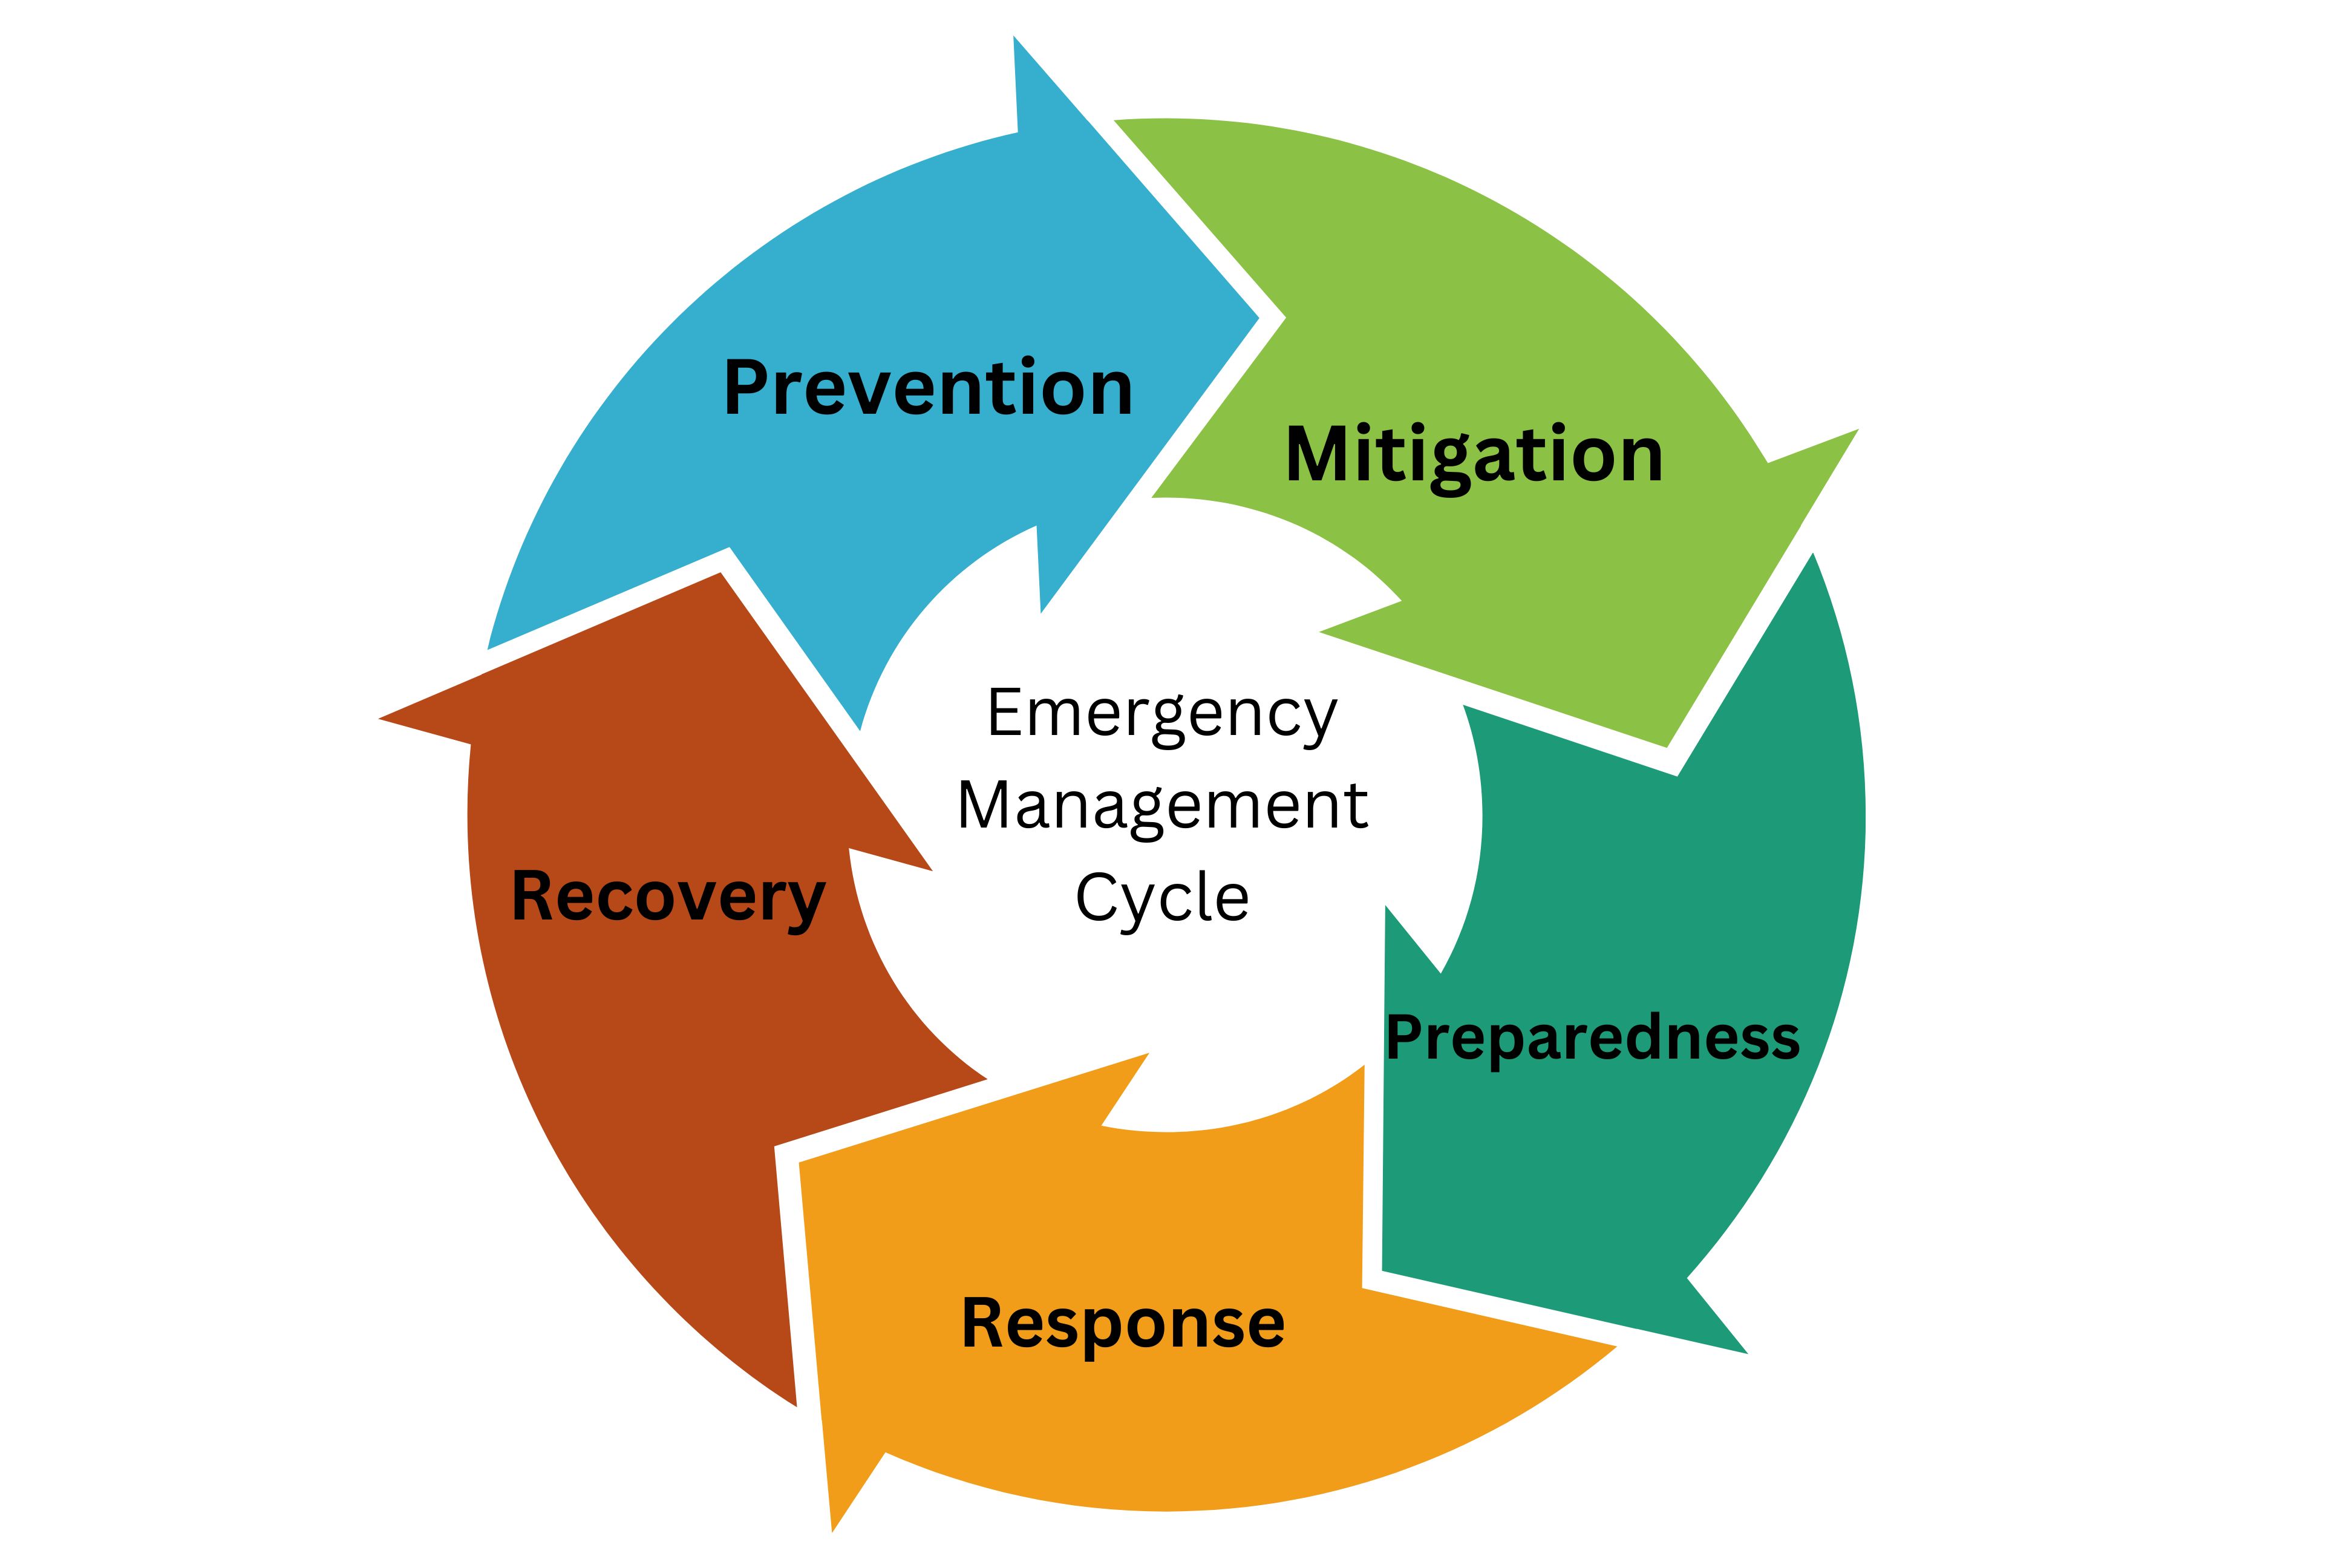 A circle of arrows, listing the emergency management cycle: Prevention, Mitigation, Preparedness, Response & Recovery